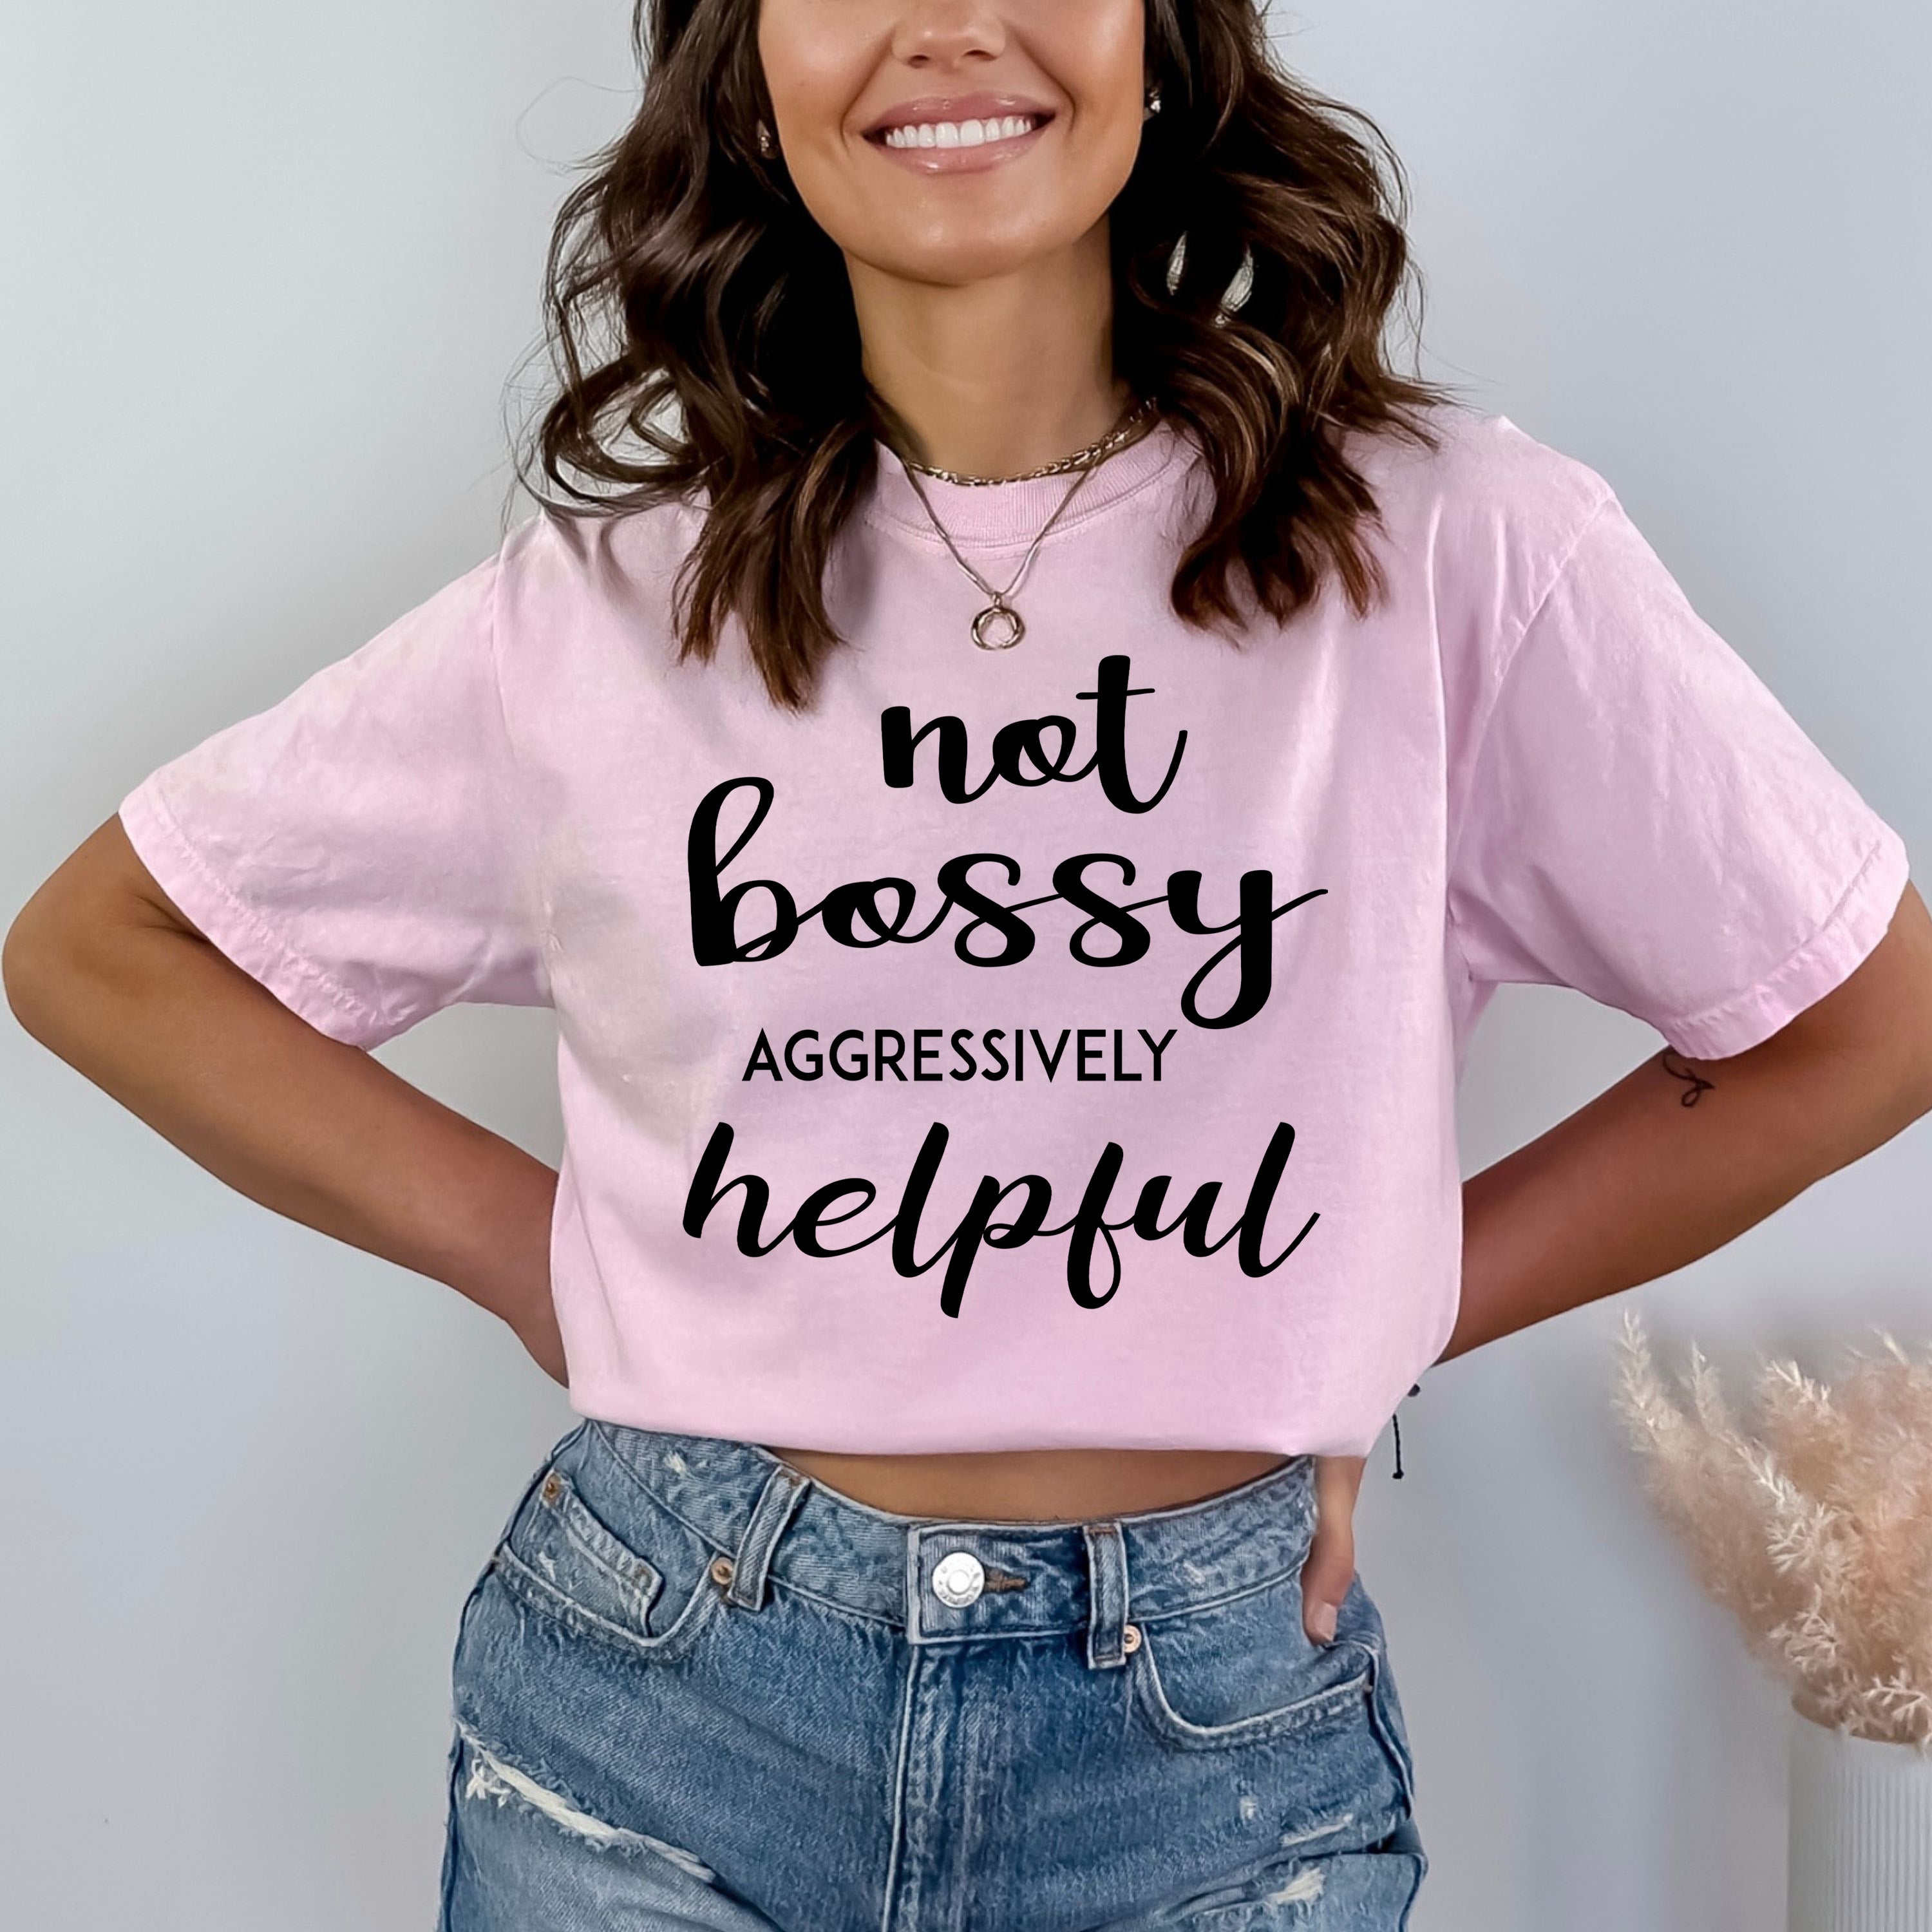 Not Bossy Aggressively Helpful - Bella Canvas